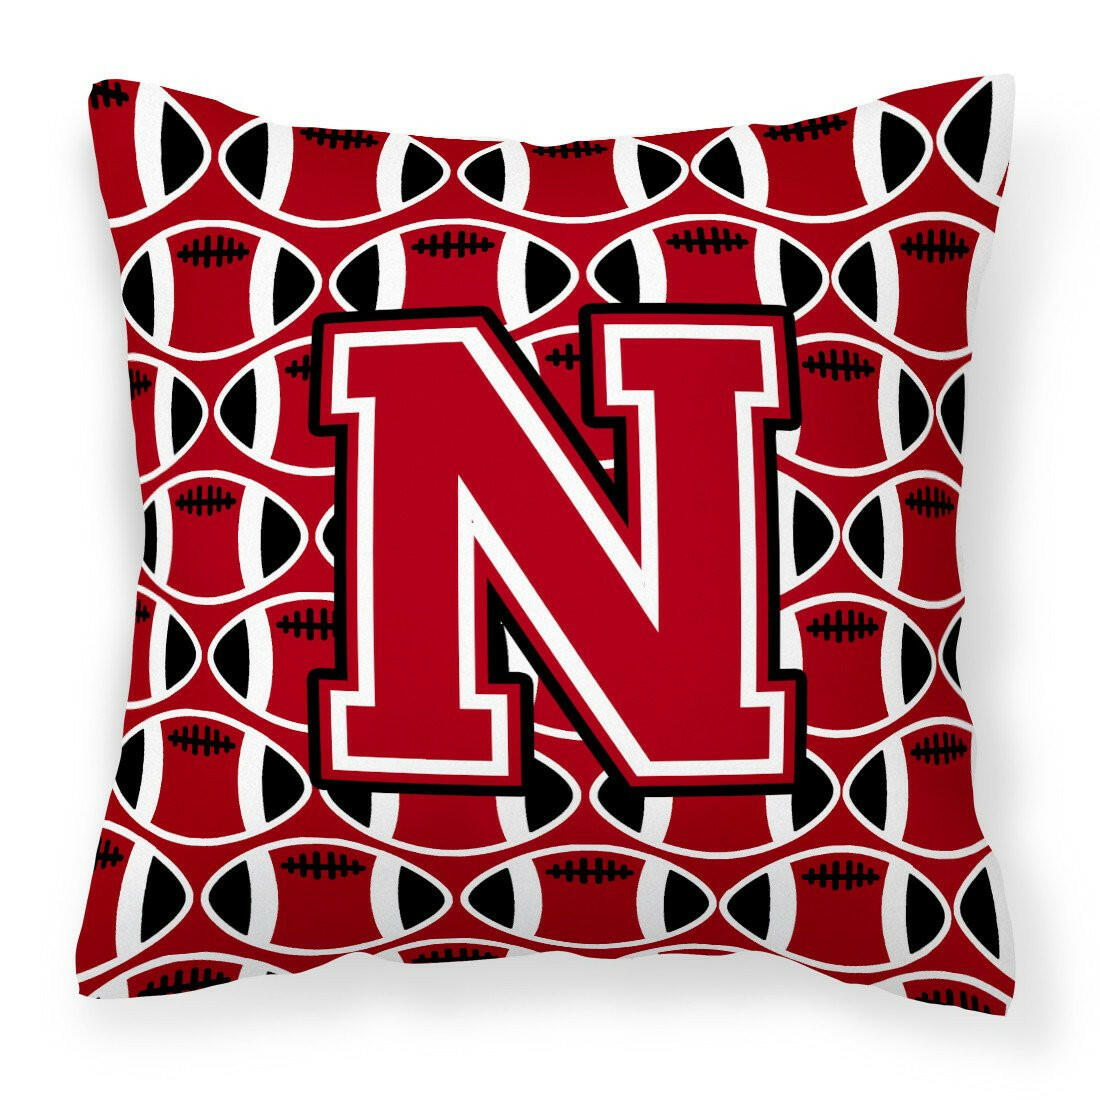 Letter N Football Red, Black and White Fabric Decorative Pillow CJ1073-NPW1414 by Caroline's Treasures